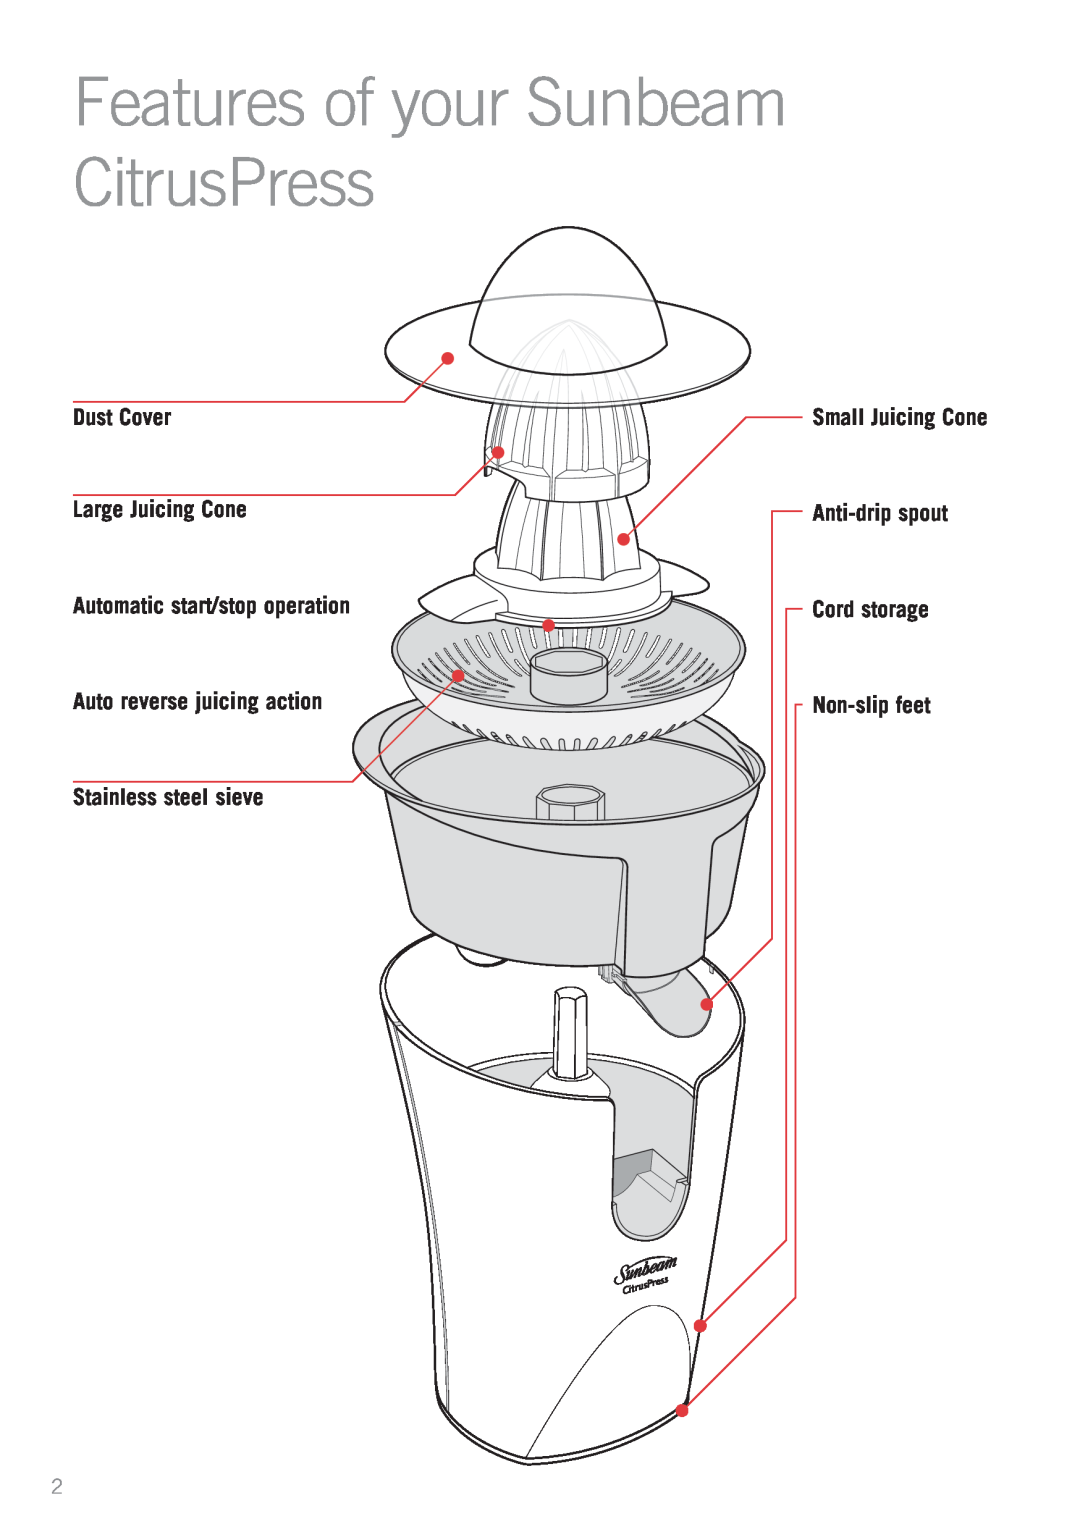 Sunbeam JE2700 manual Features of your Sunbeam CitrusPress, Dust Cover, Large Juicing Cone, Anti-drip spout, Cord storage 